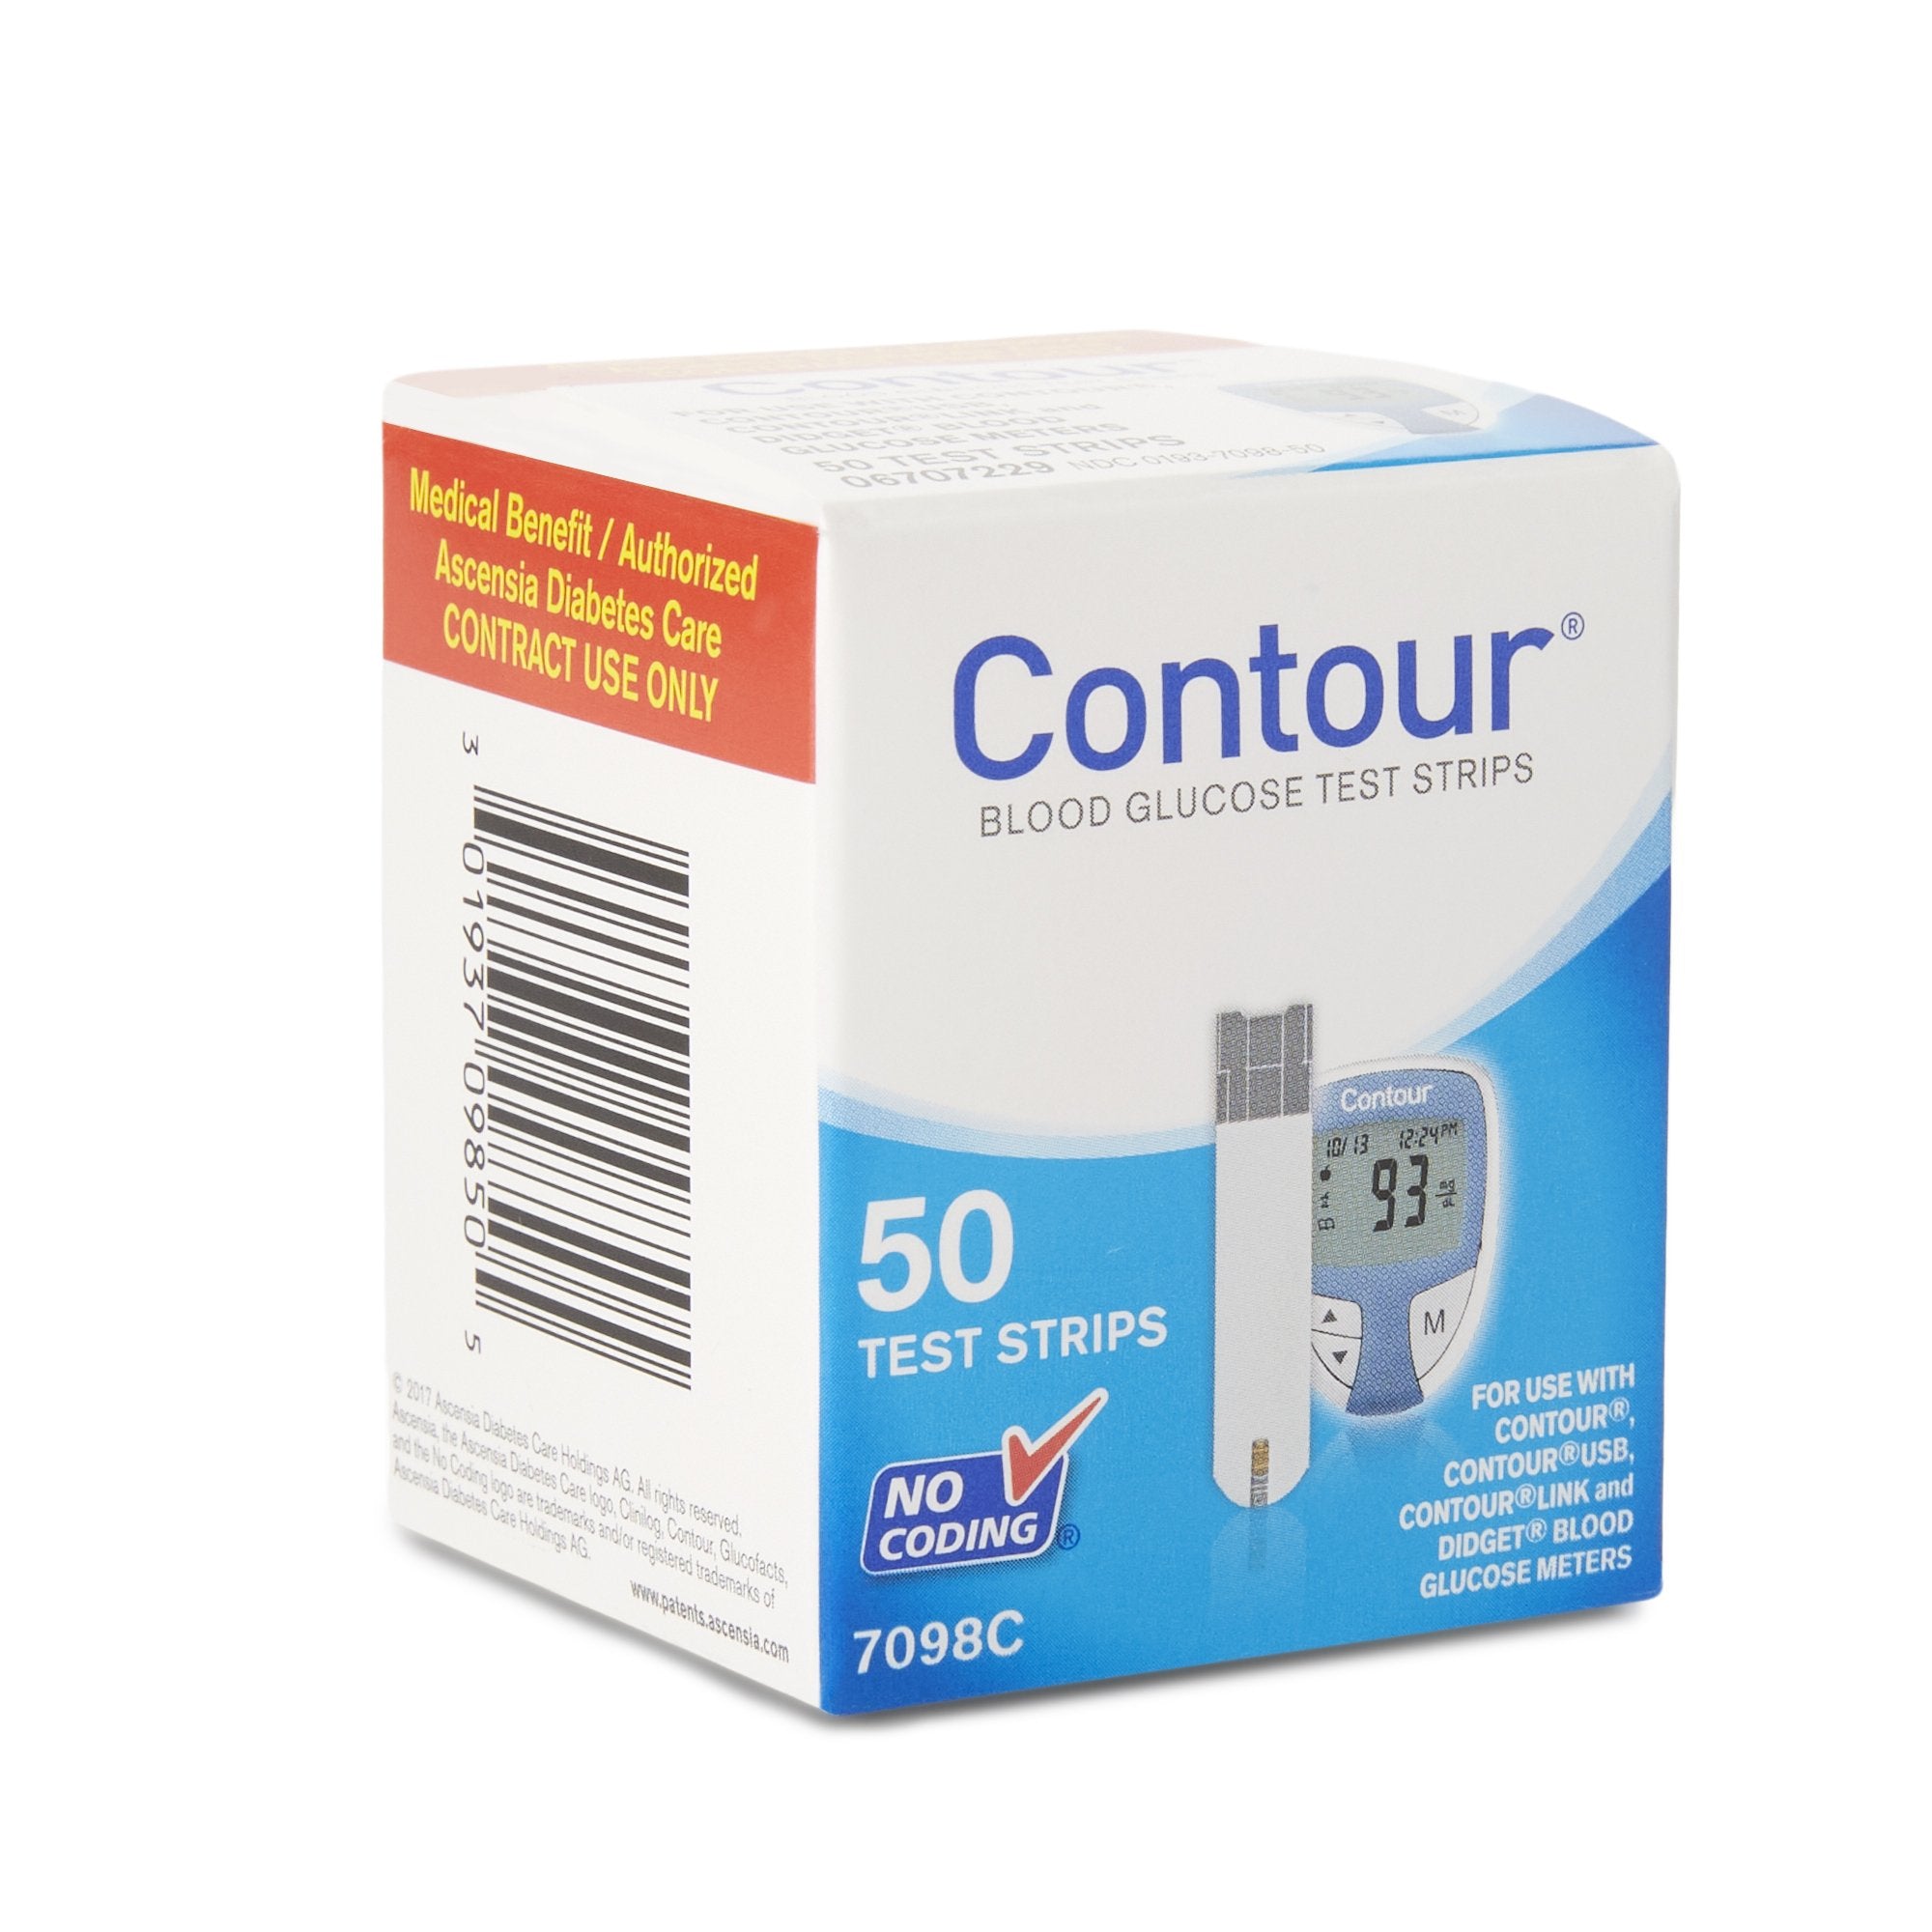 Blood Glucose Test Strips Contour 50 Strips per Pack